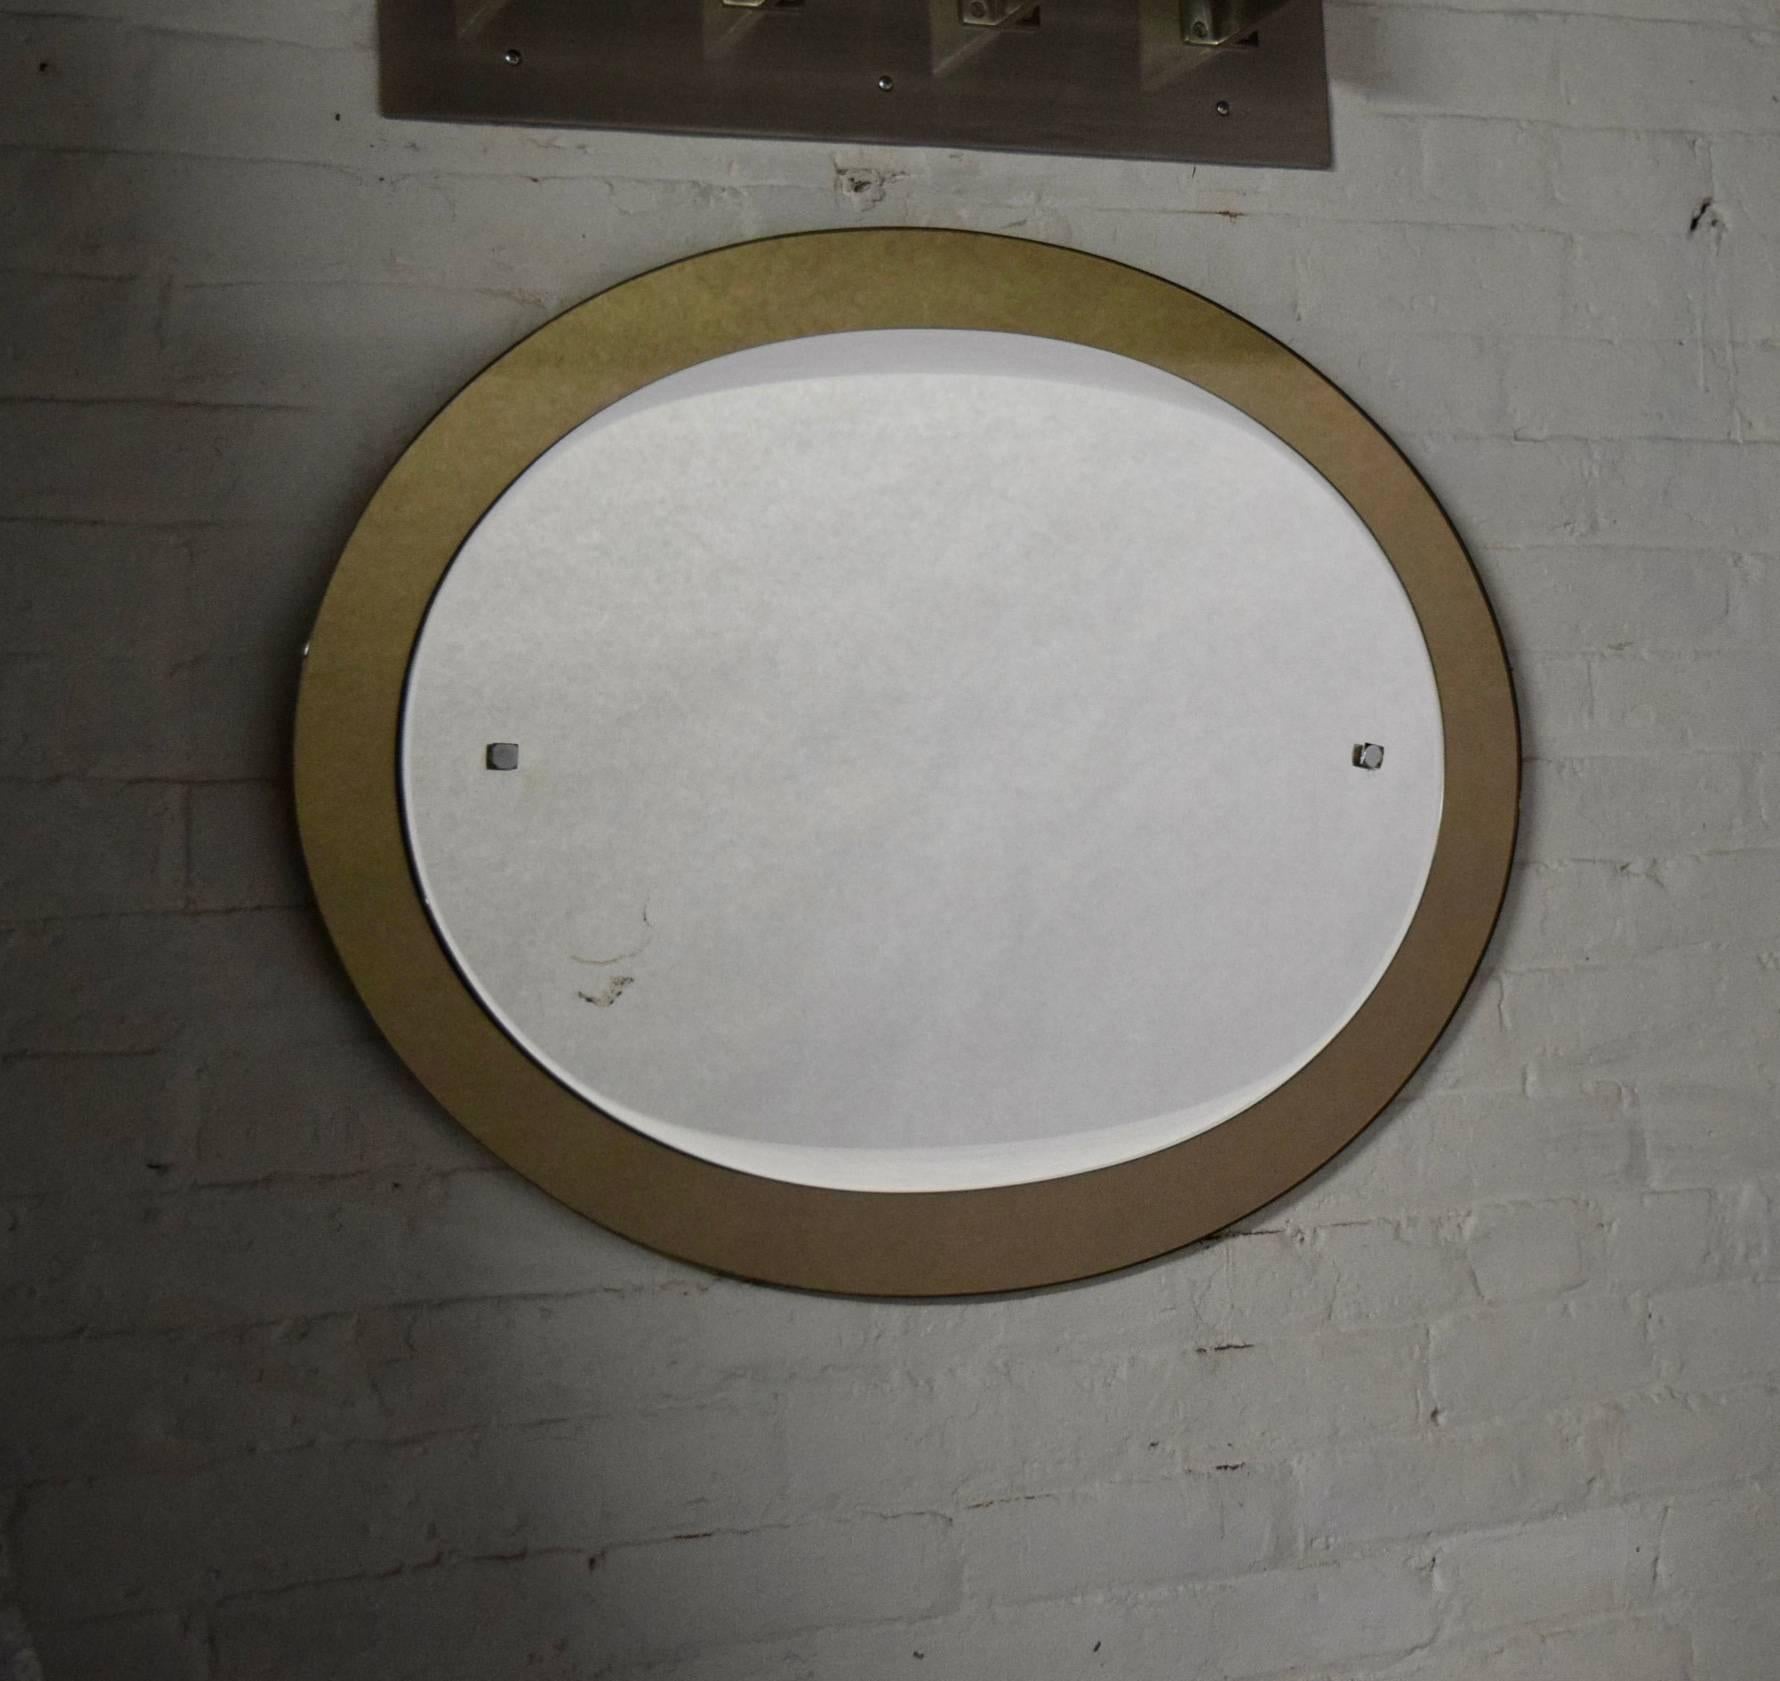 Wall-mounted, oval Italian mirror comprises a centre mirror with a tapering and curved bevel on the top and bottom, framed by a bronze toned smoked mirror and two square metal details. Silver age mark on one side, shown in image number 5.